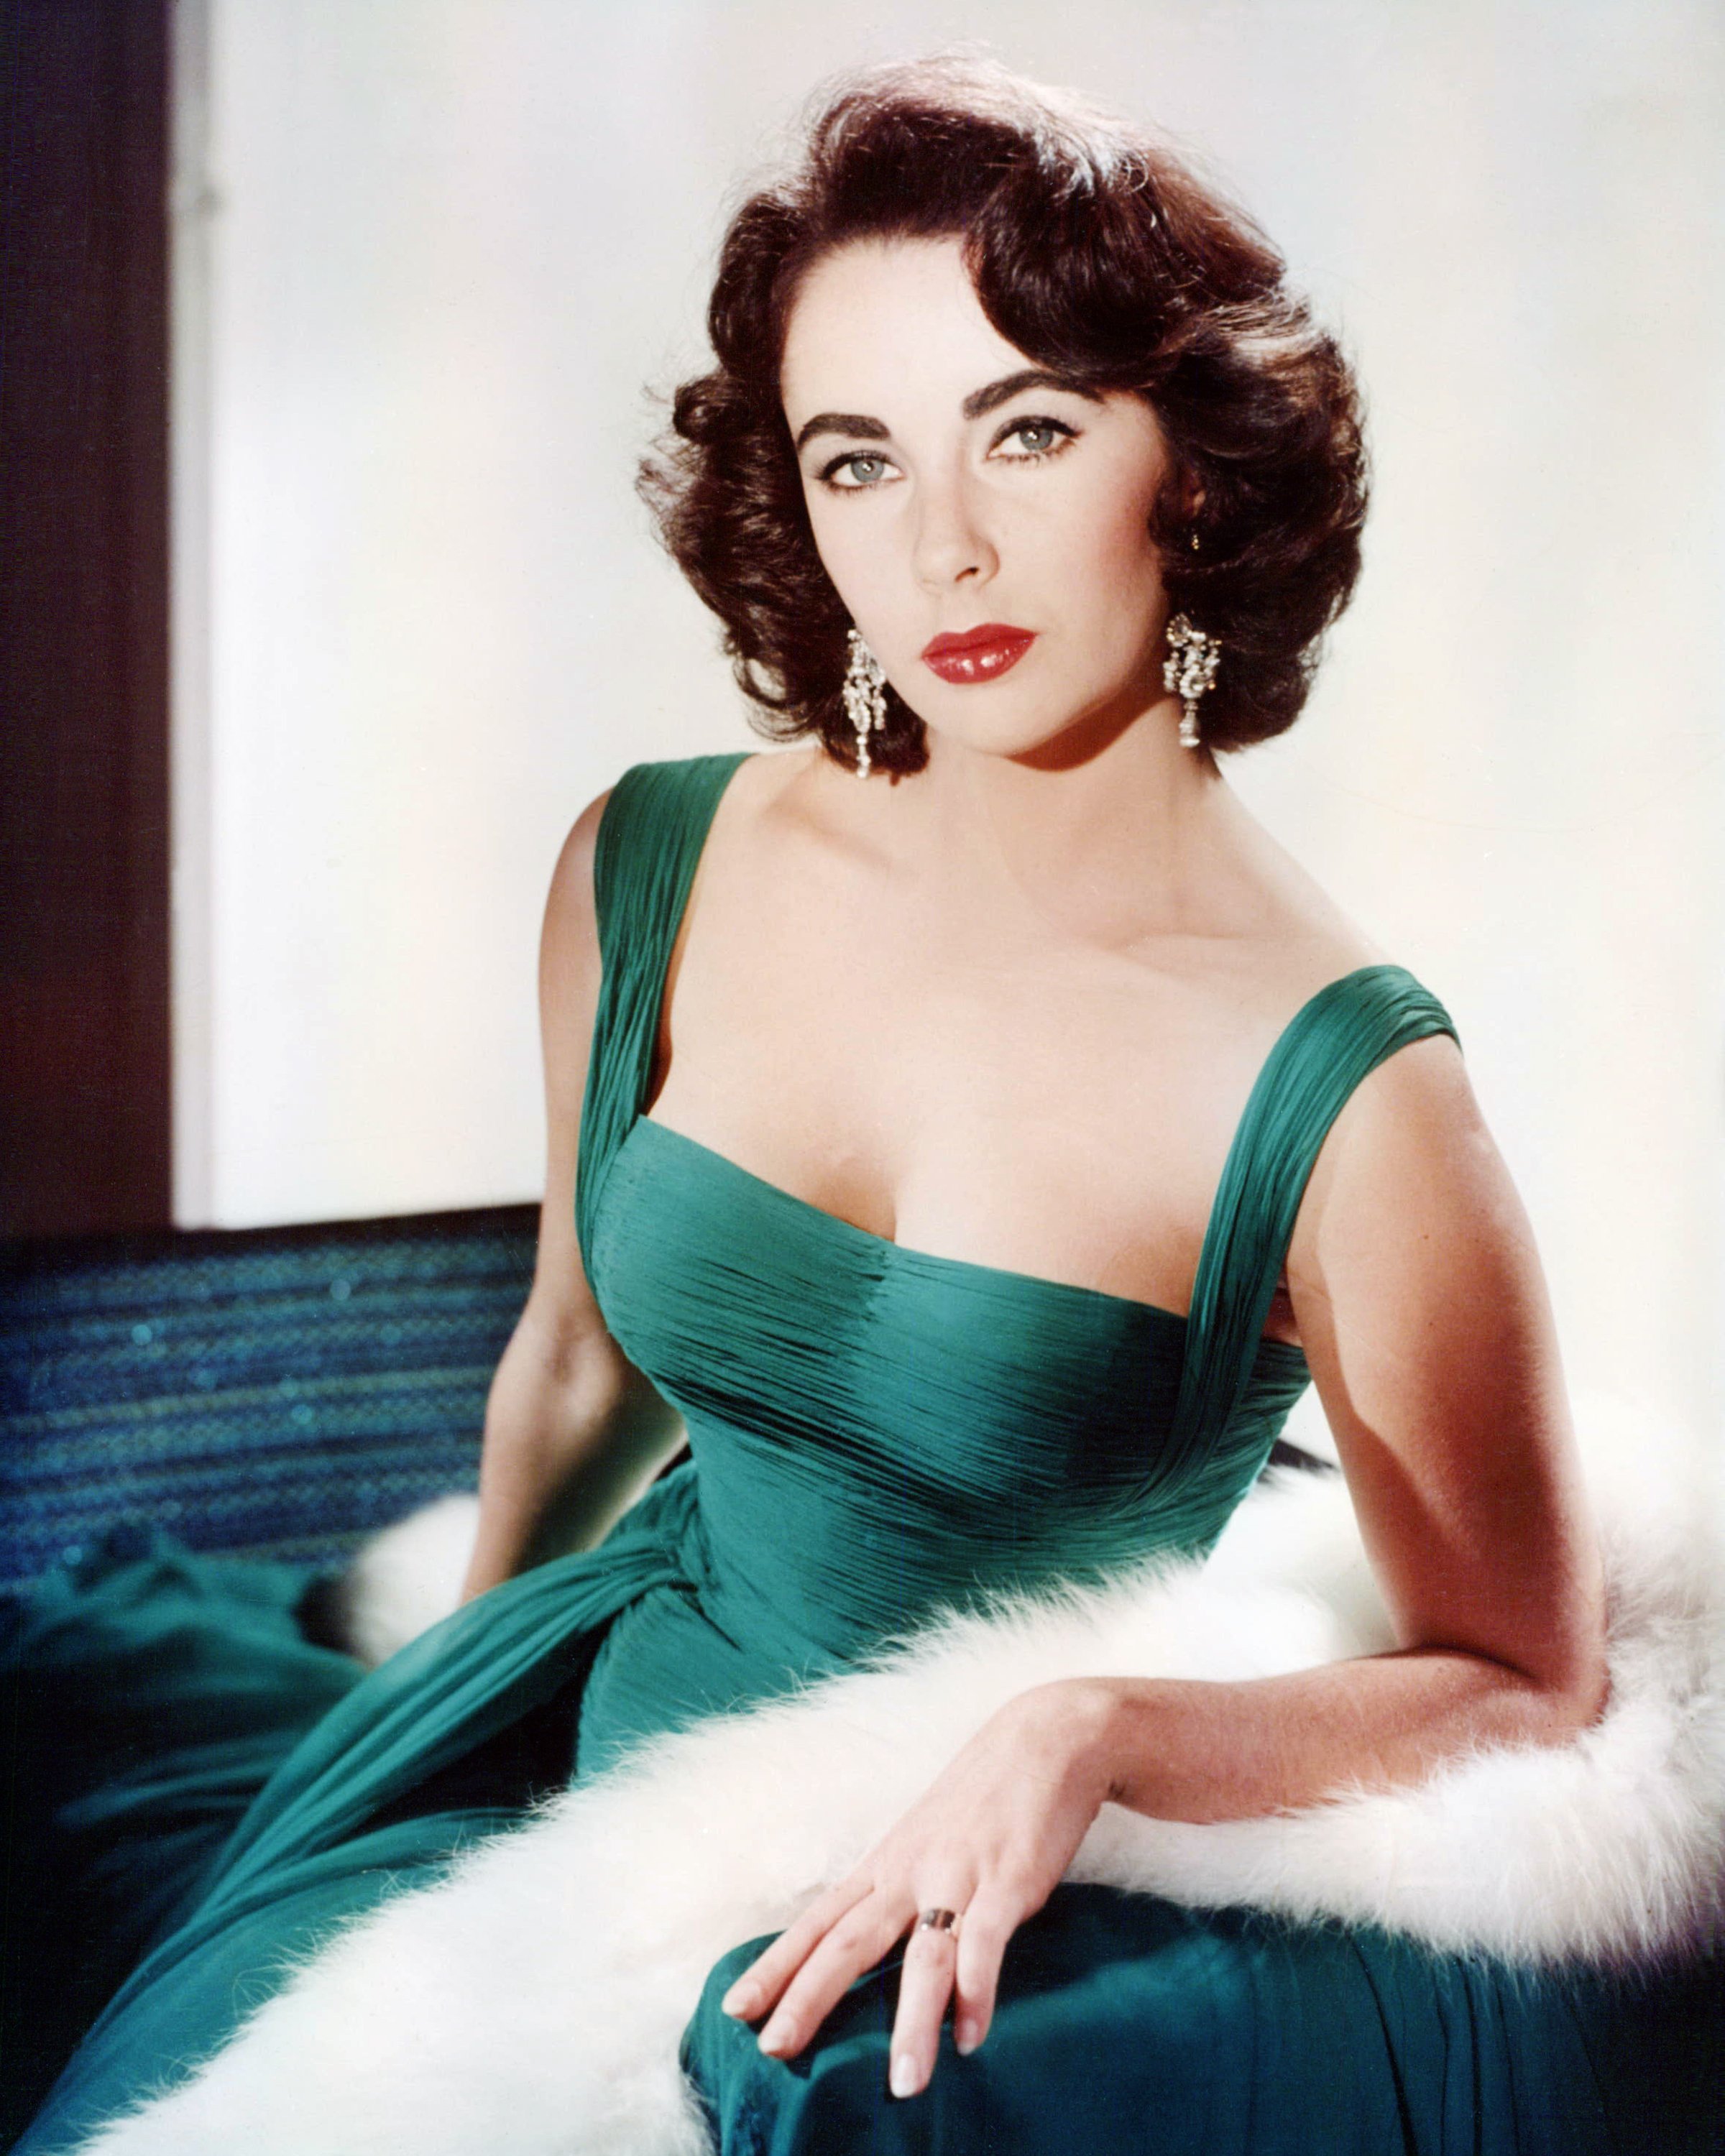 Elizabeth Taylor (1932-2011), British actress, wearing a green sleeveless low-cut dress, with a white fur wrap on the arm of the armchair in which she sits, circa 1950. | Source: Getty Images